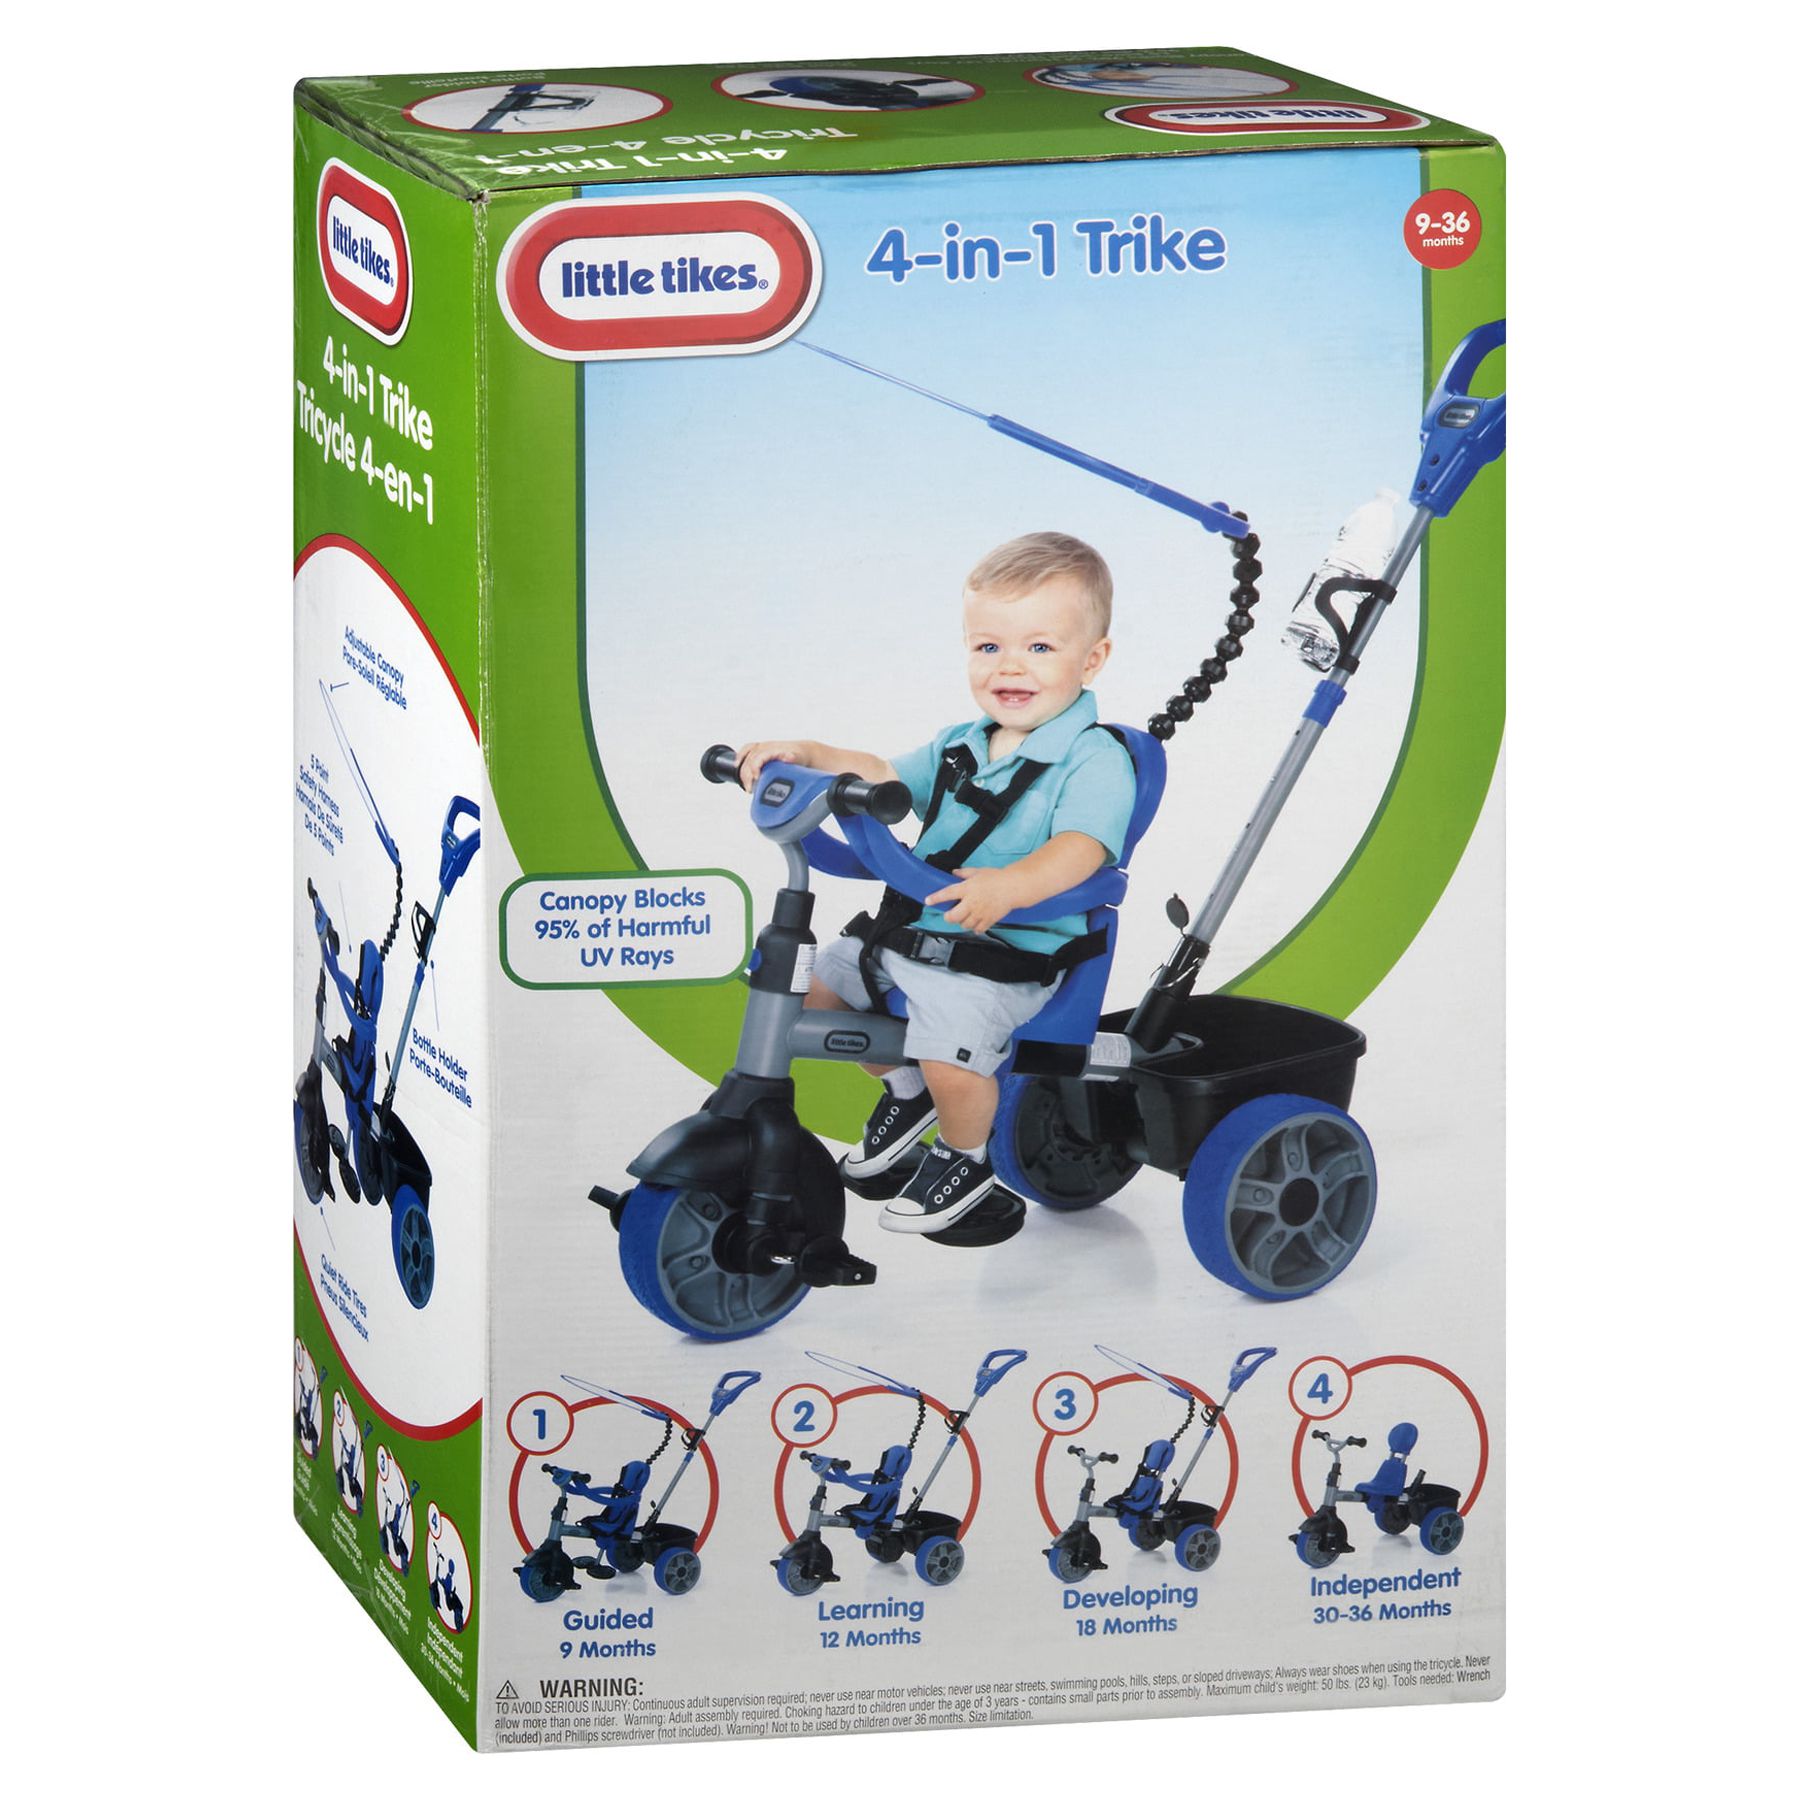 Little Tikes 4-in-1 Basic Edition Trike in Blue, Convertible Tricycle for Toddlers Tricycle with 4 Stages of Growth and Shade Canopy- For Kids Kids Boys Girls Ages 9 Months to 3 Years Old - image 5 of 8